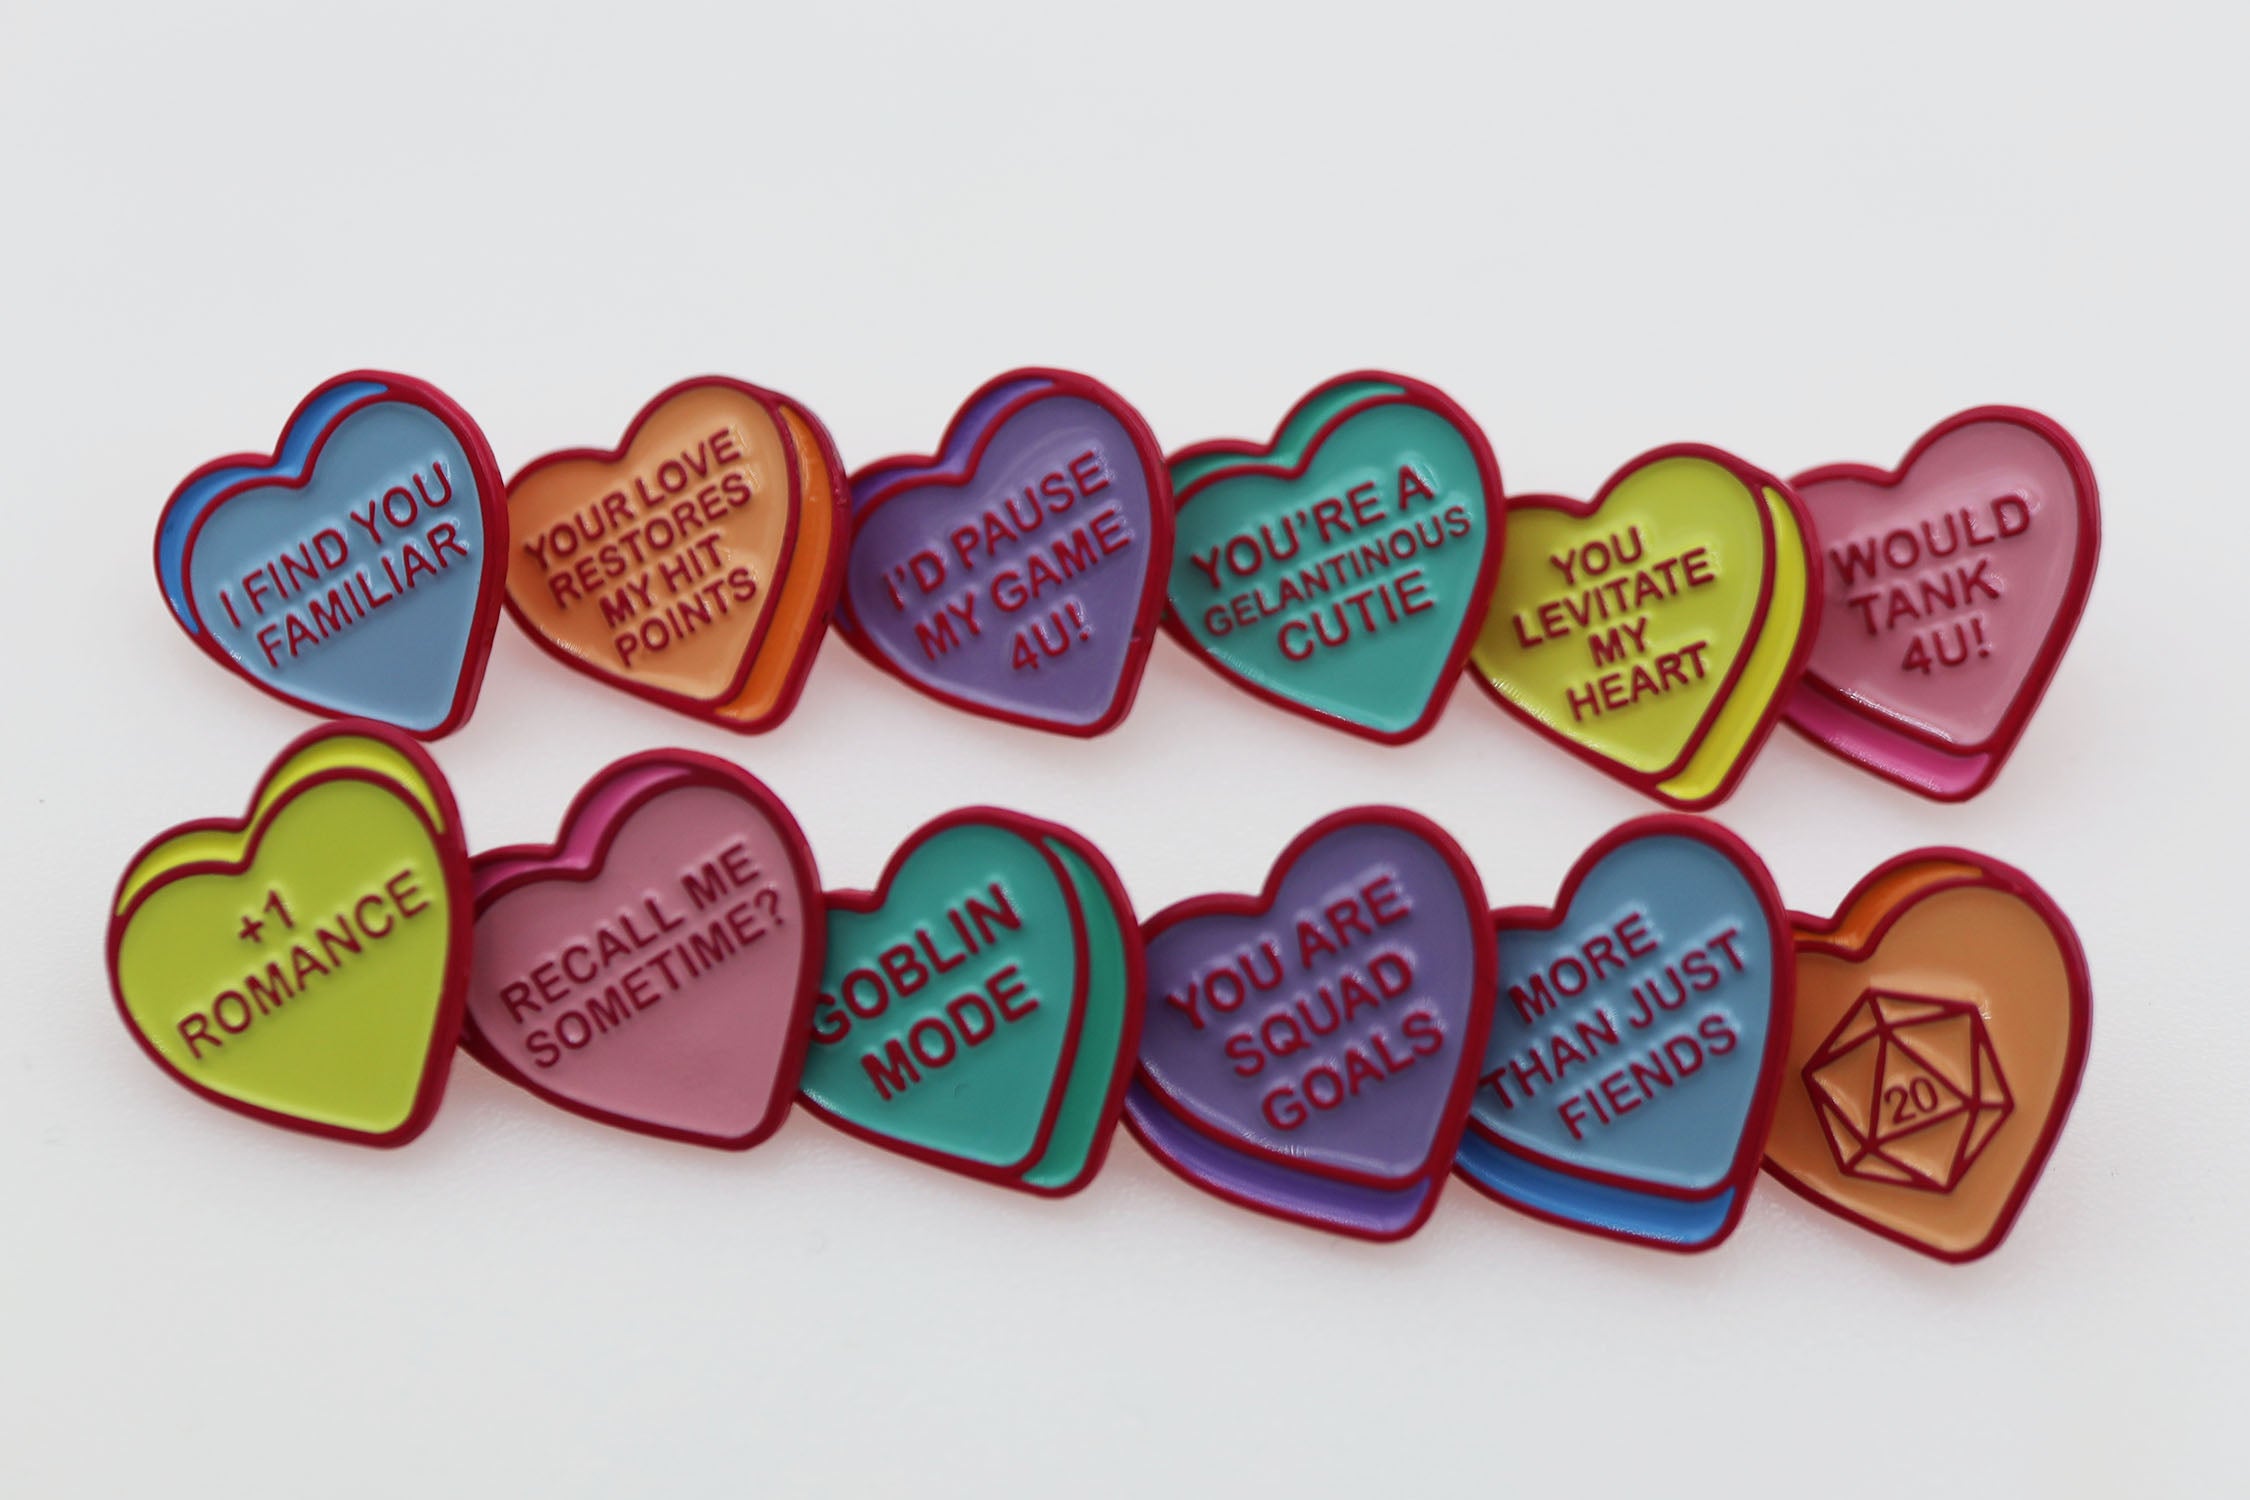 What Do Candy Hearts Tell Us? Be Clever. Be Current. Be Mine. - The New  York Times